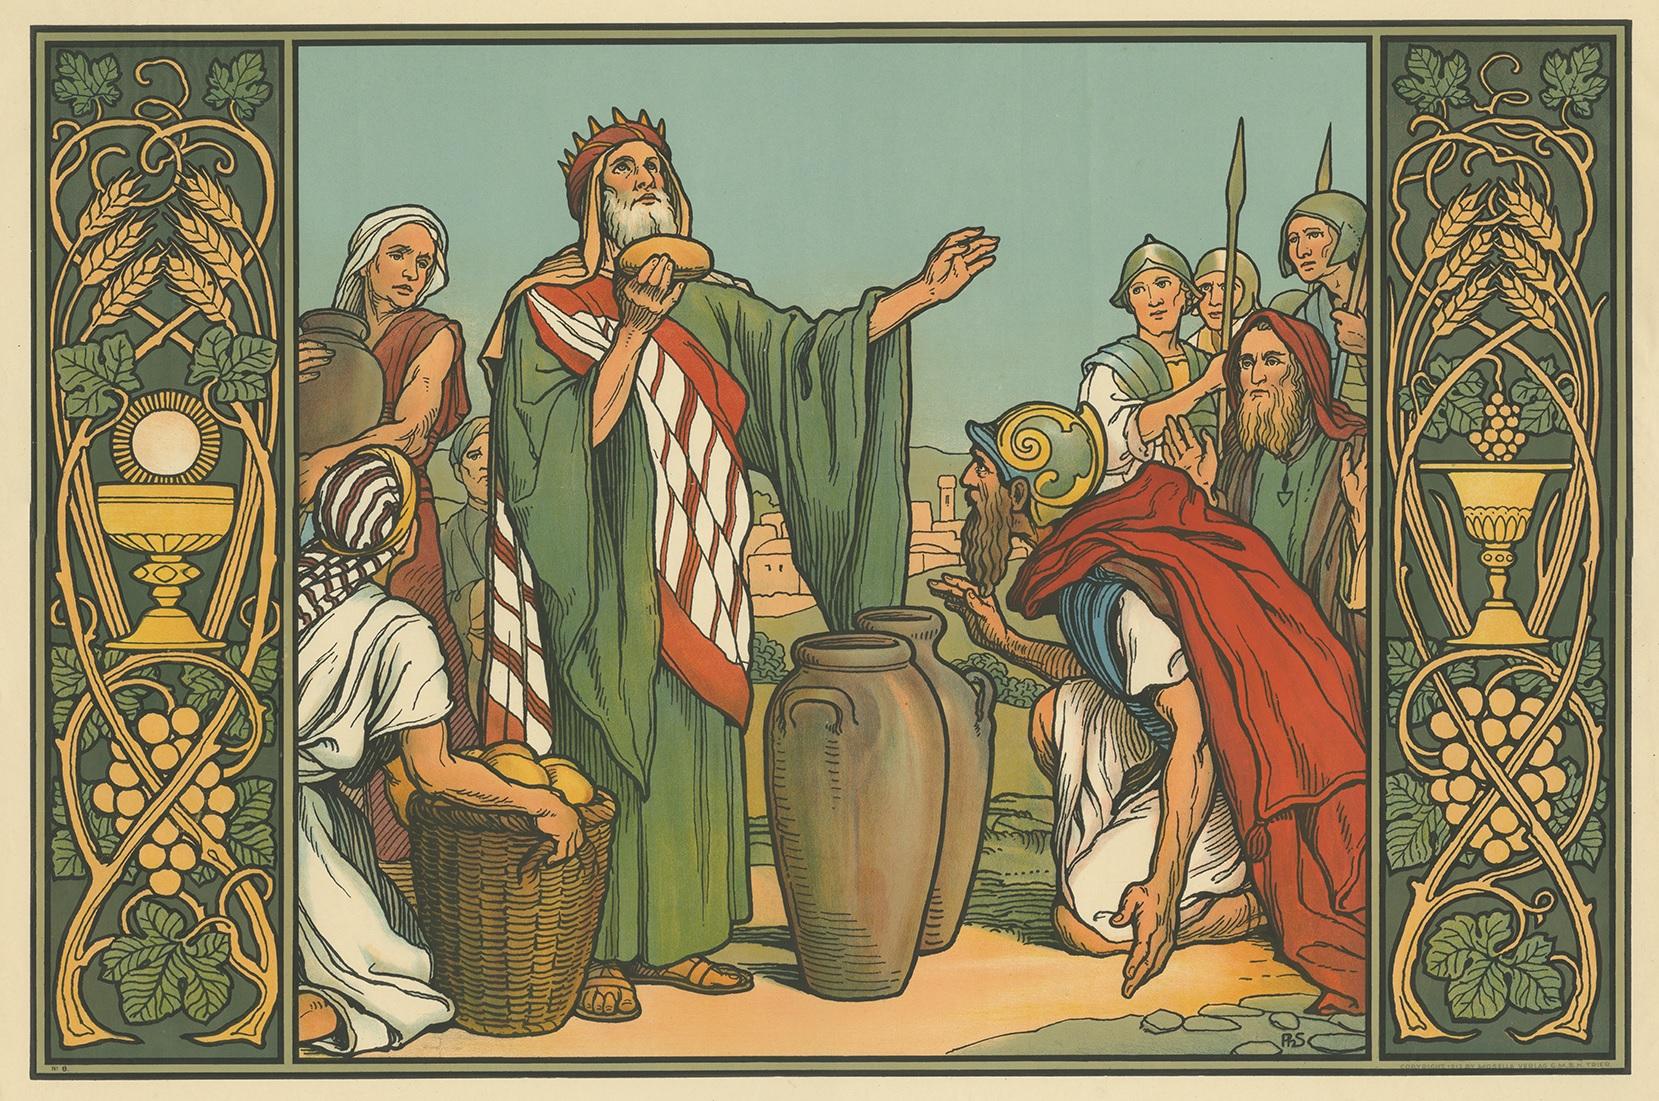 Large antique print of Abraham blessed by Melchizedek. Published by Mosella-Verlag, 1913. This print originates from a series titled 'Kathol. Schulbibelwerk von Dr. Ecker'.